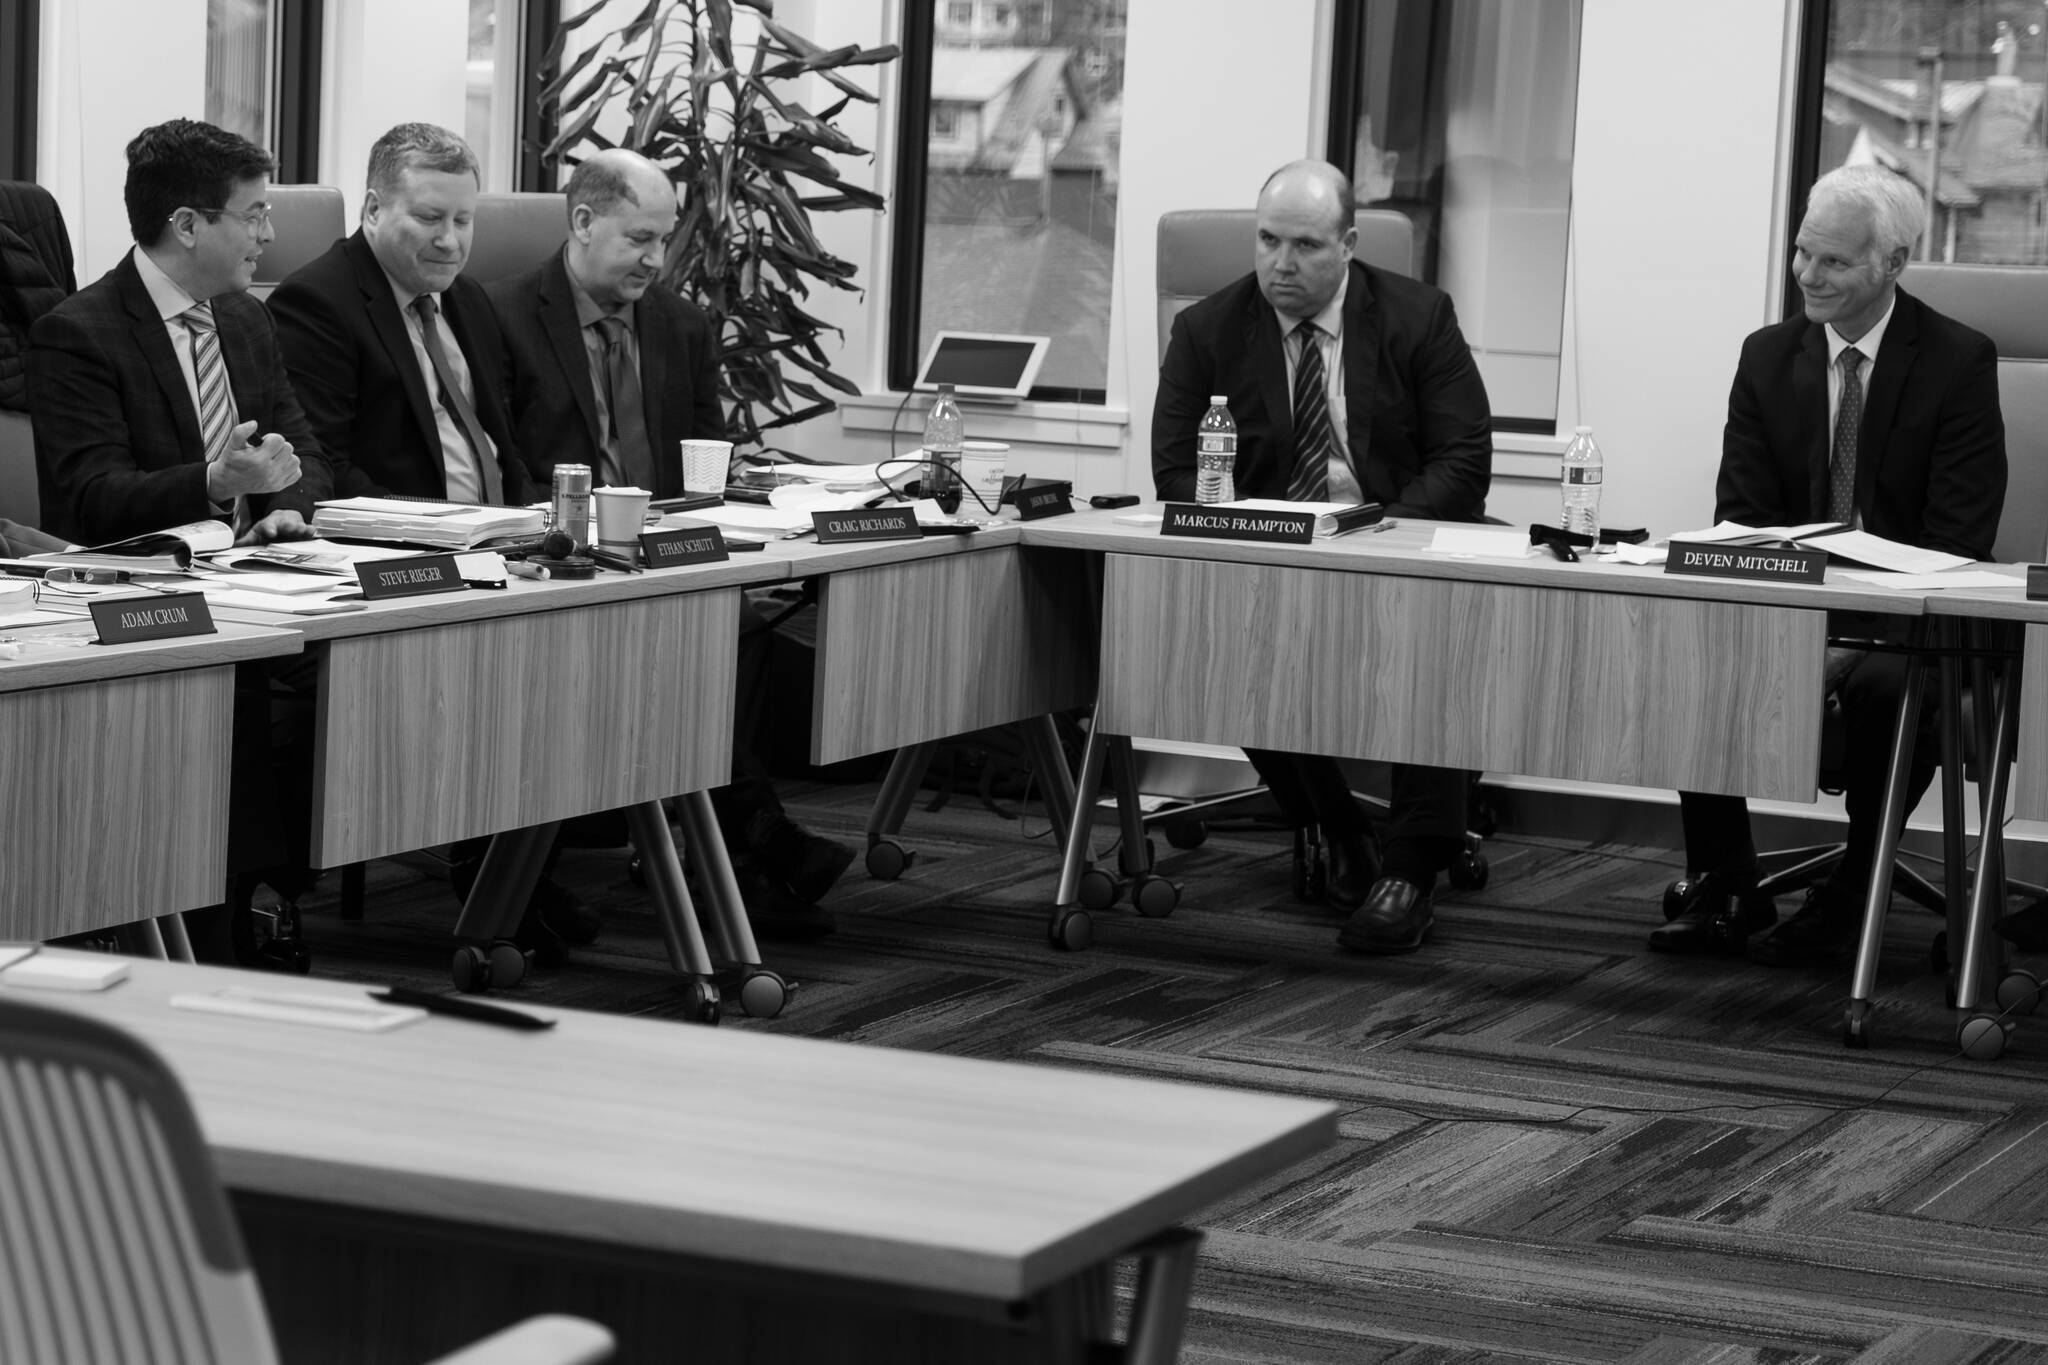 Trustees and Staff discuss management and investment of the Fund. (Courtesy Alaska Permanent Fund Corporation)